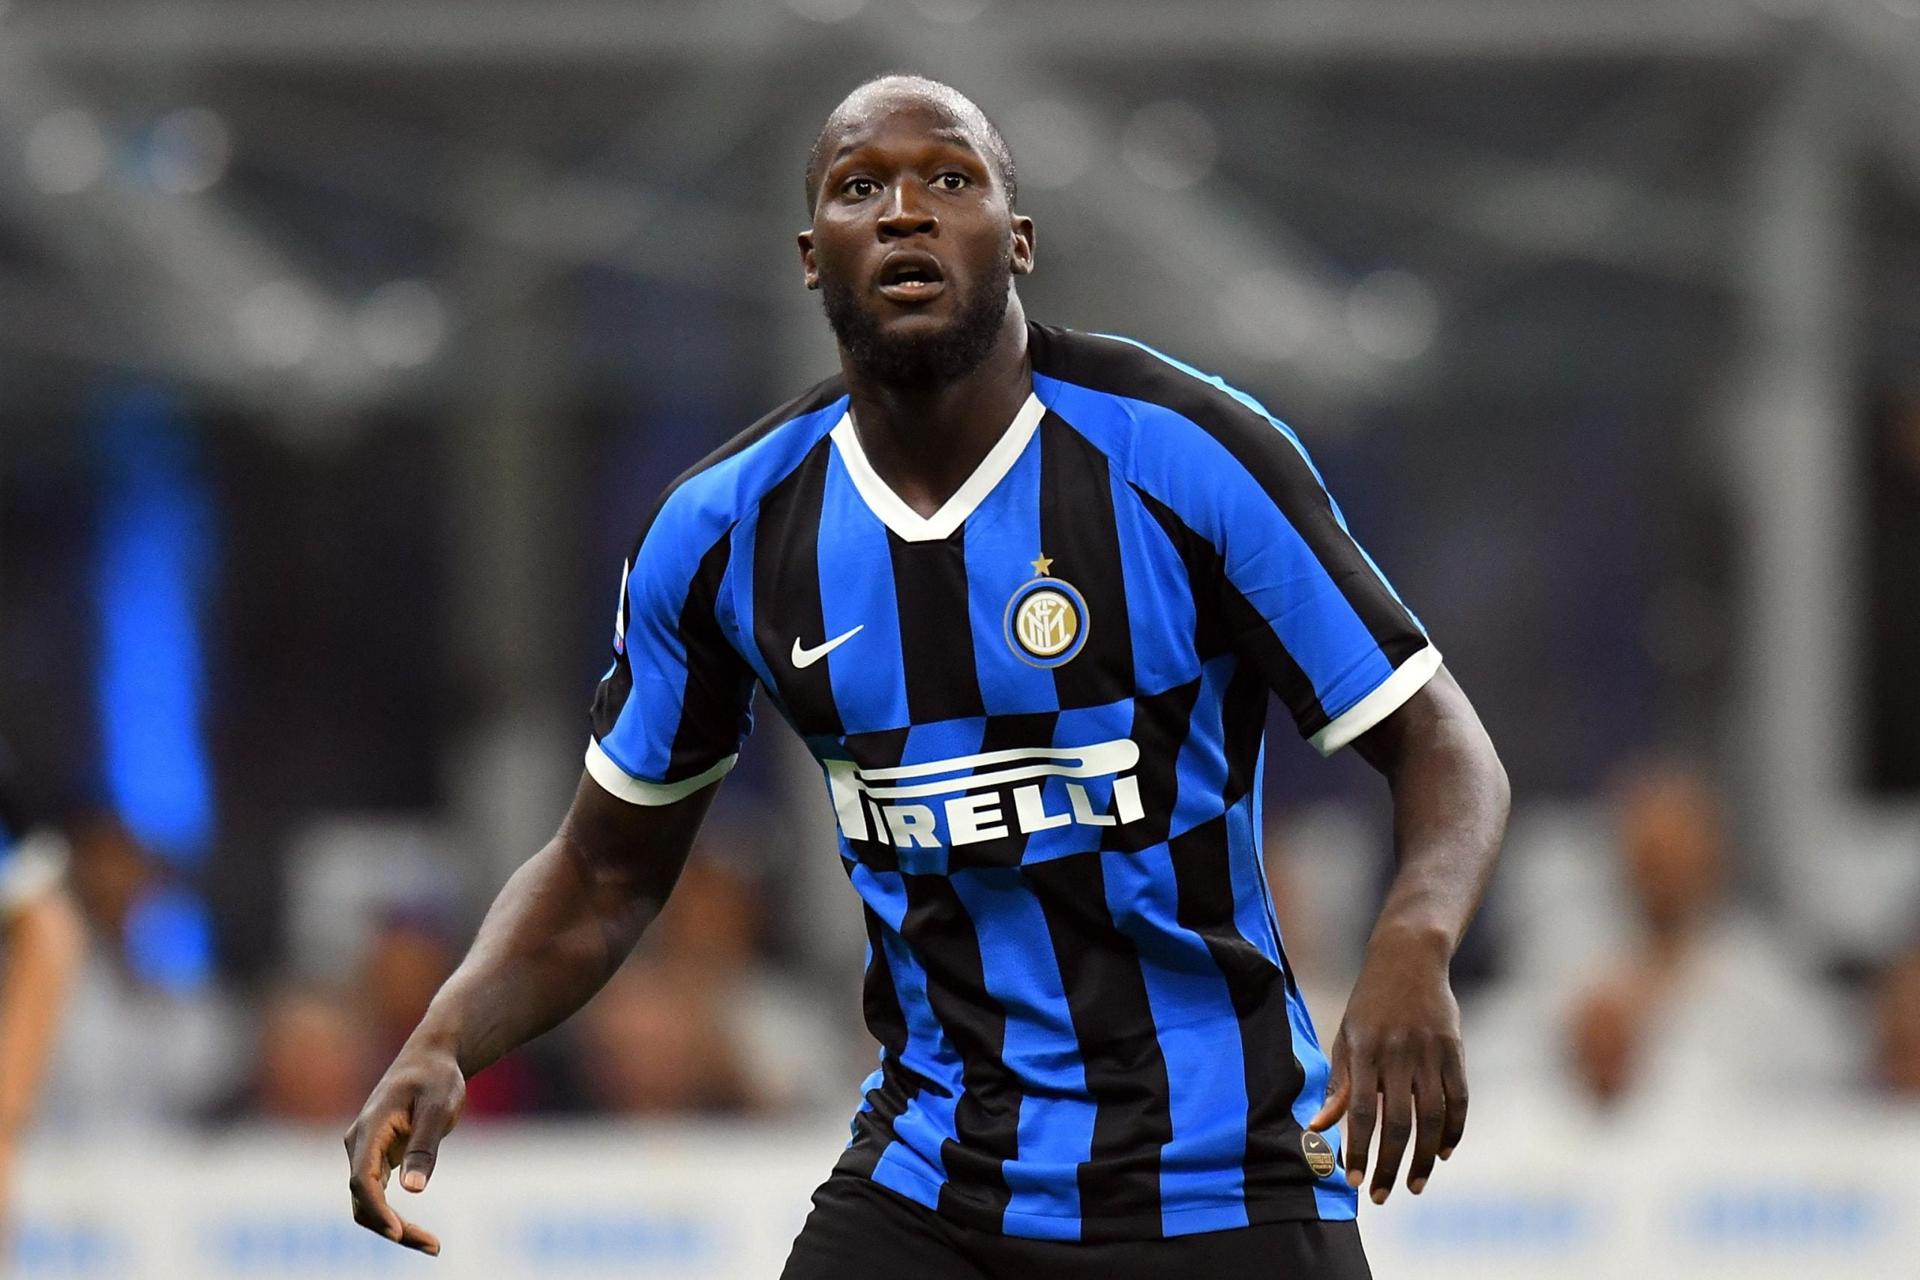 Lukaku to accept interest from Chelsea, Barcelona, others on one condition